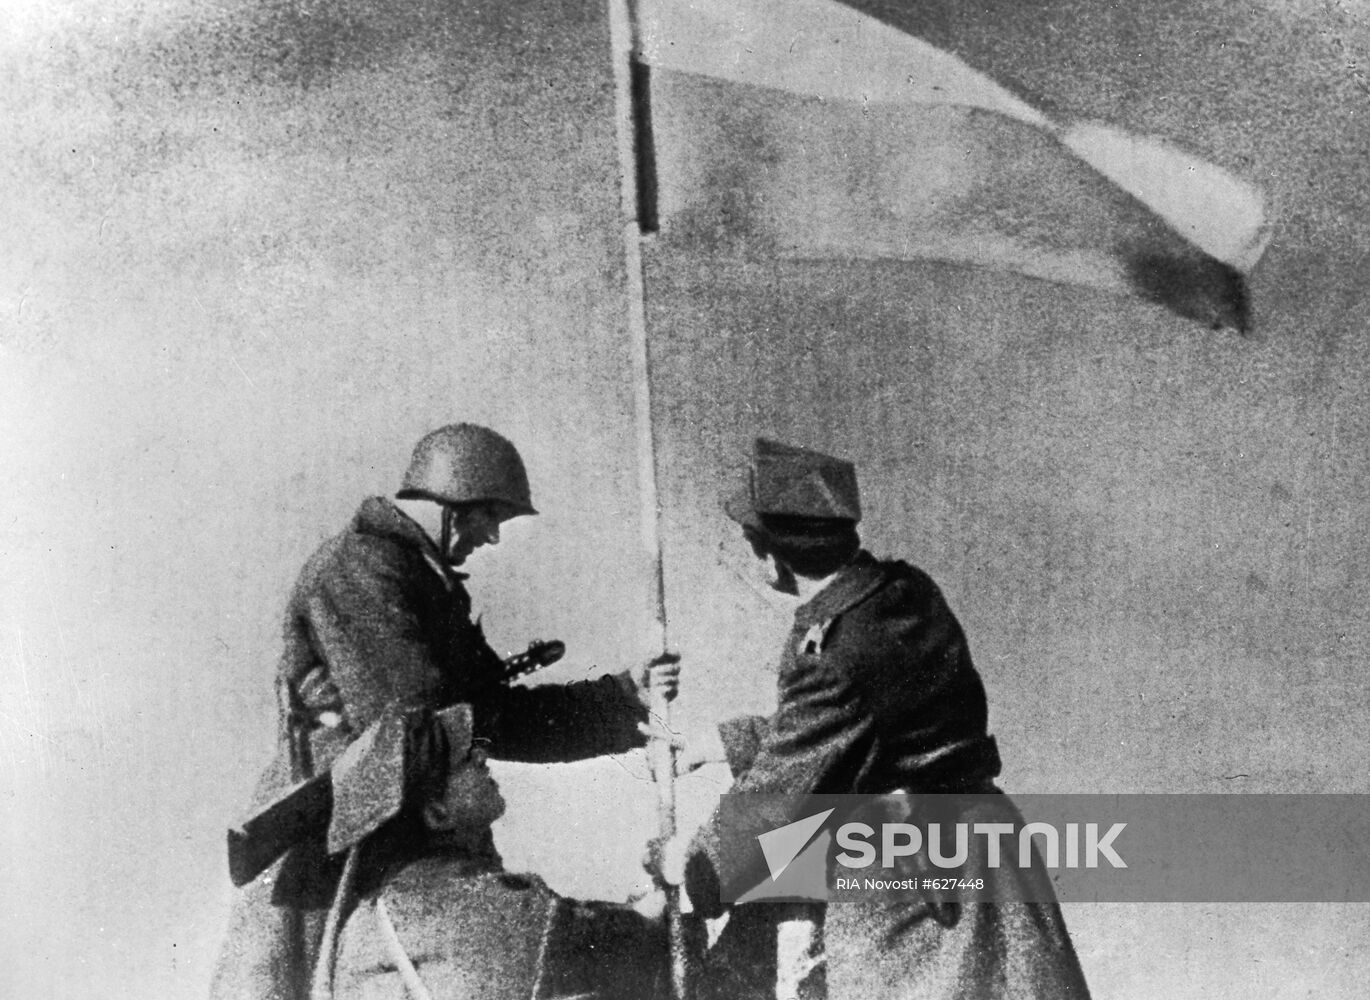 Soviet and Polish soldiers planting a Victory flag